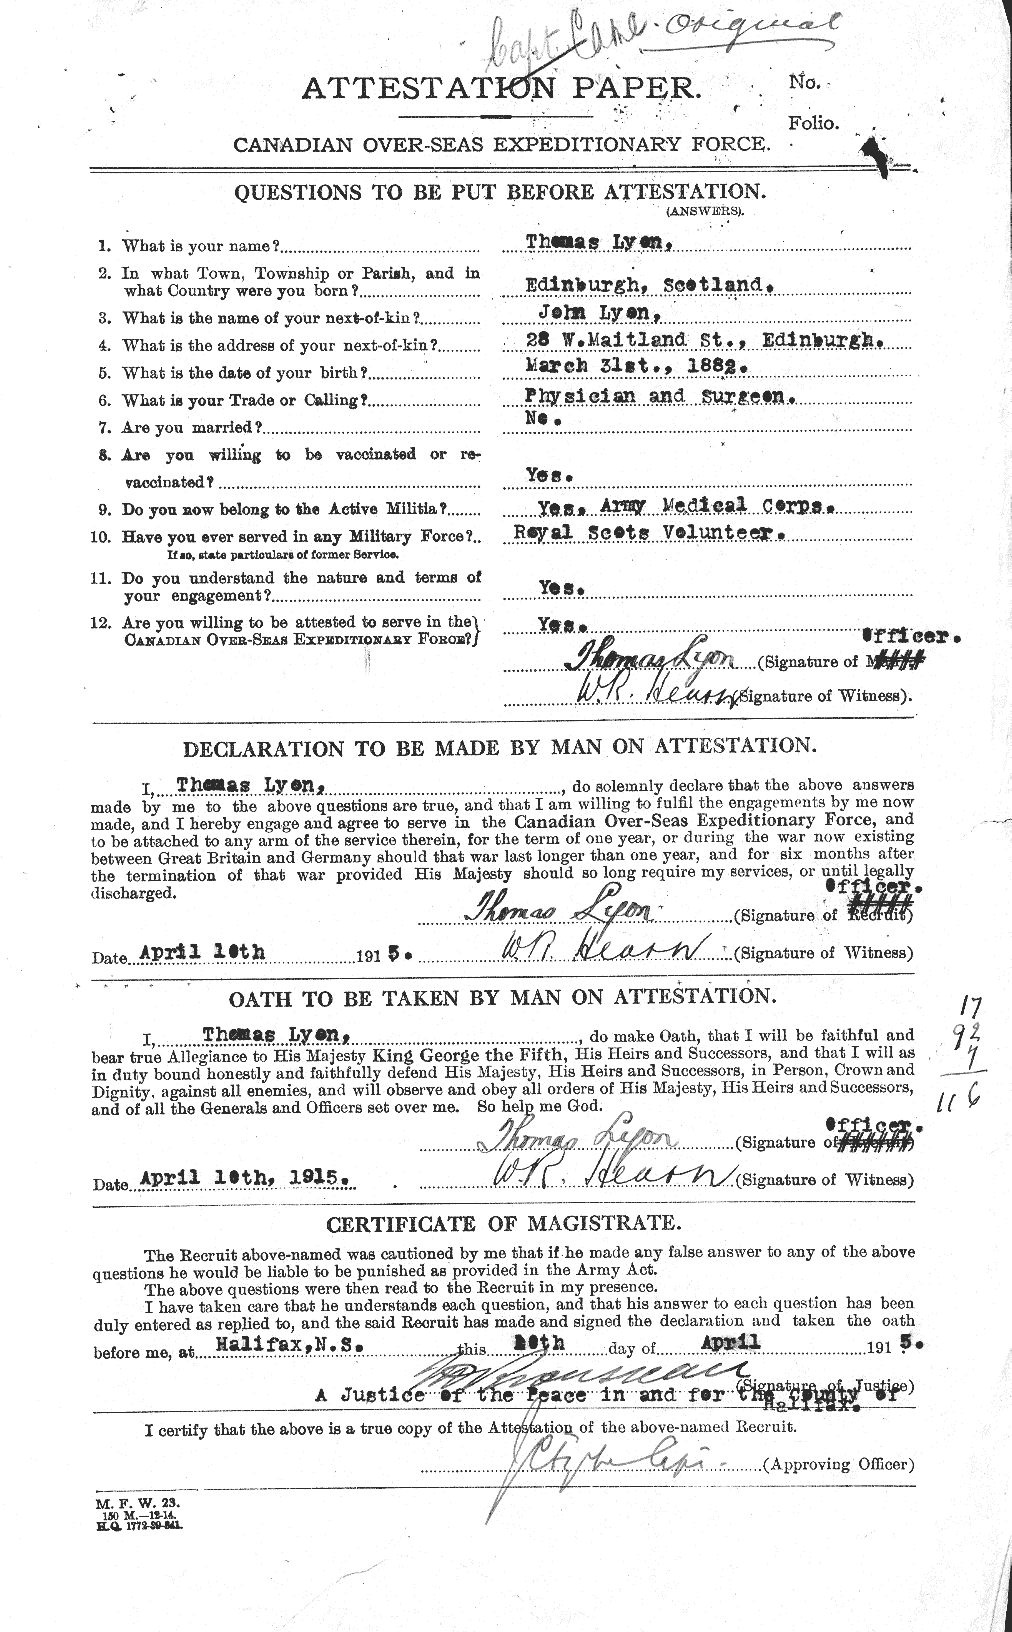 Personnel Records of the First World War - CEF 472970a